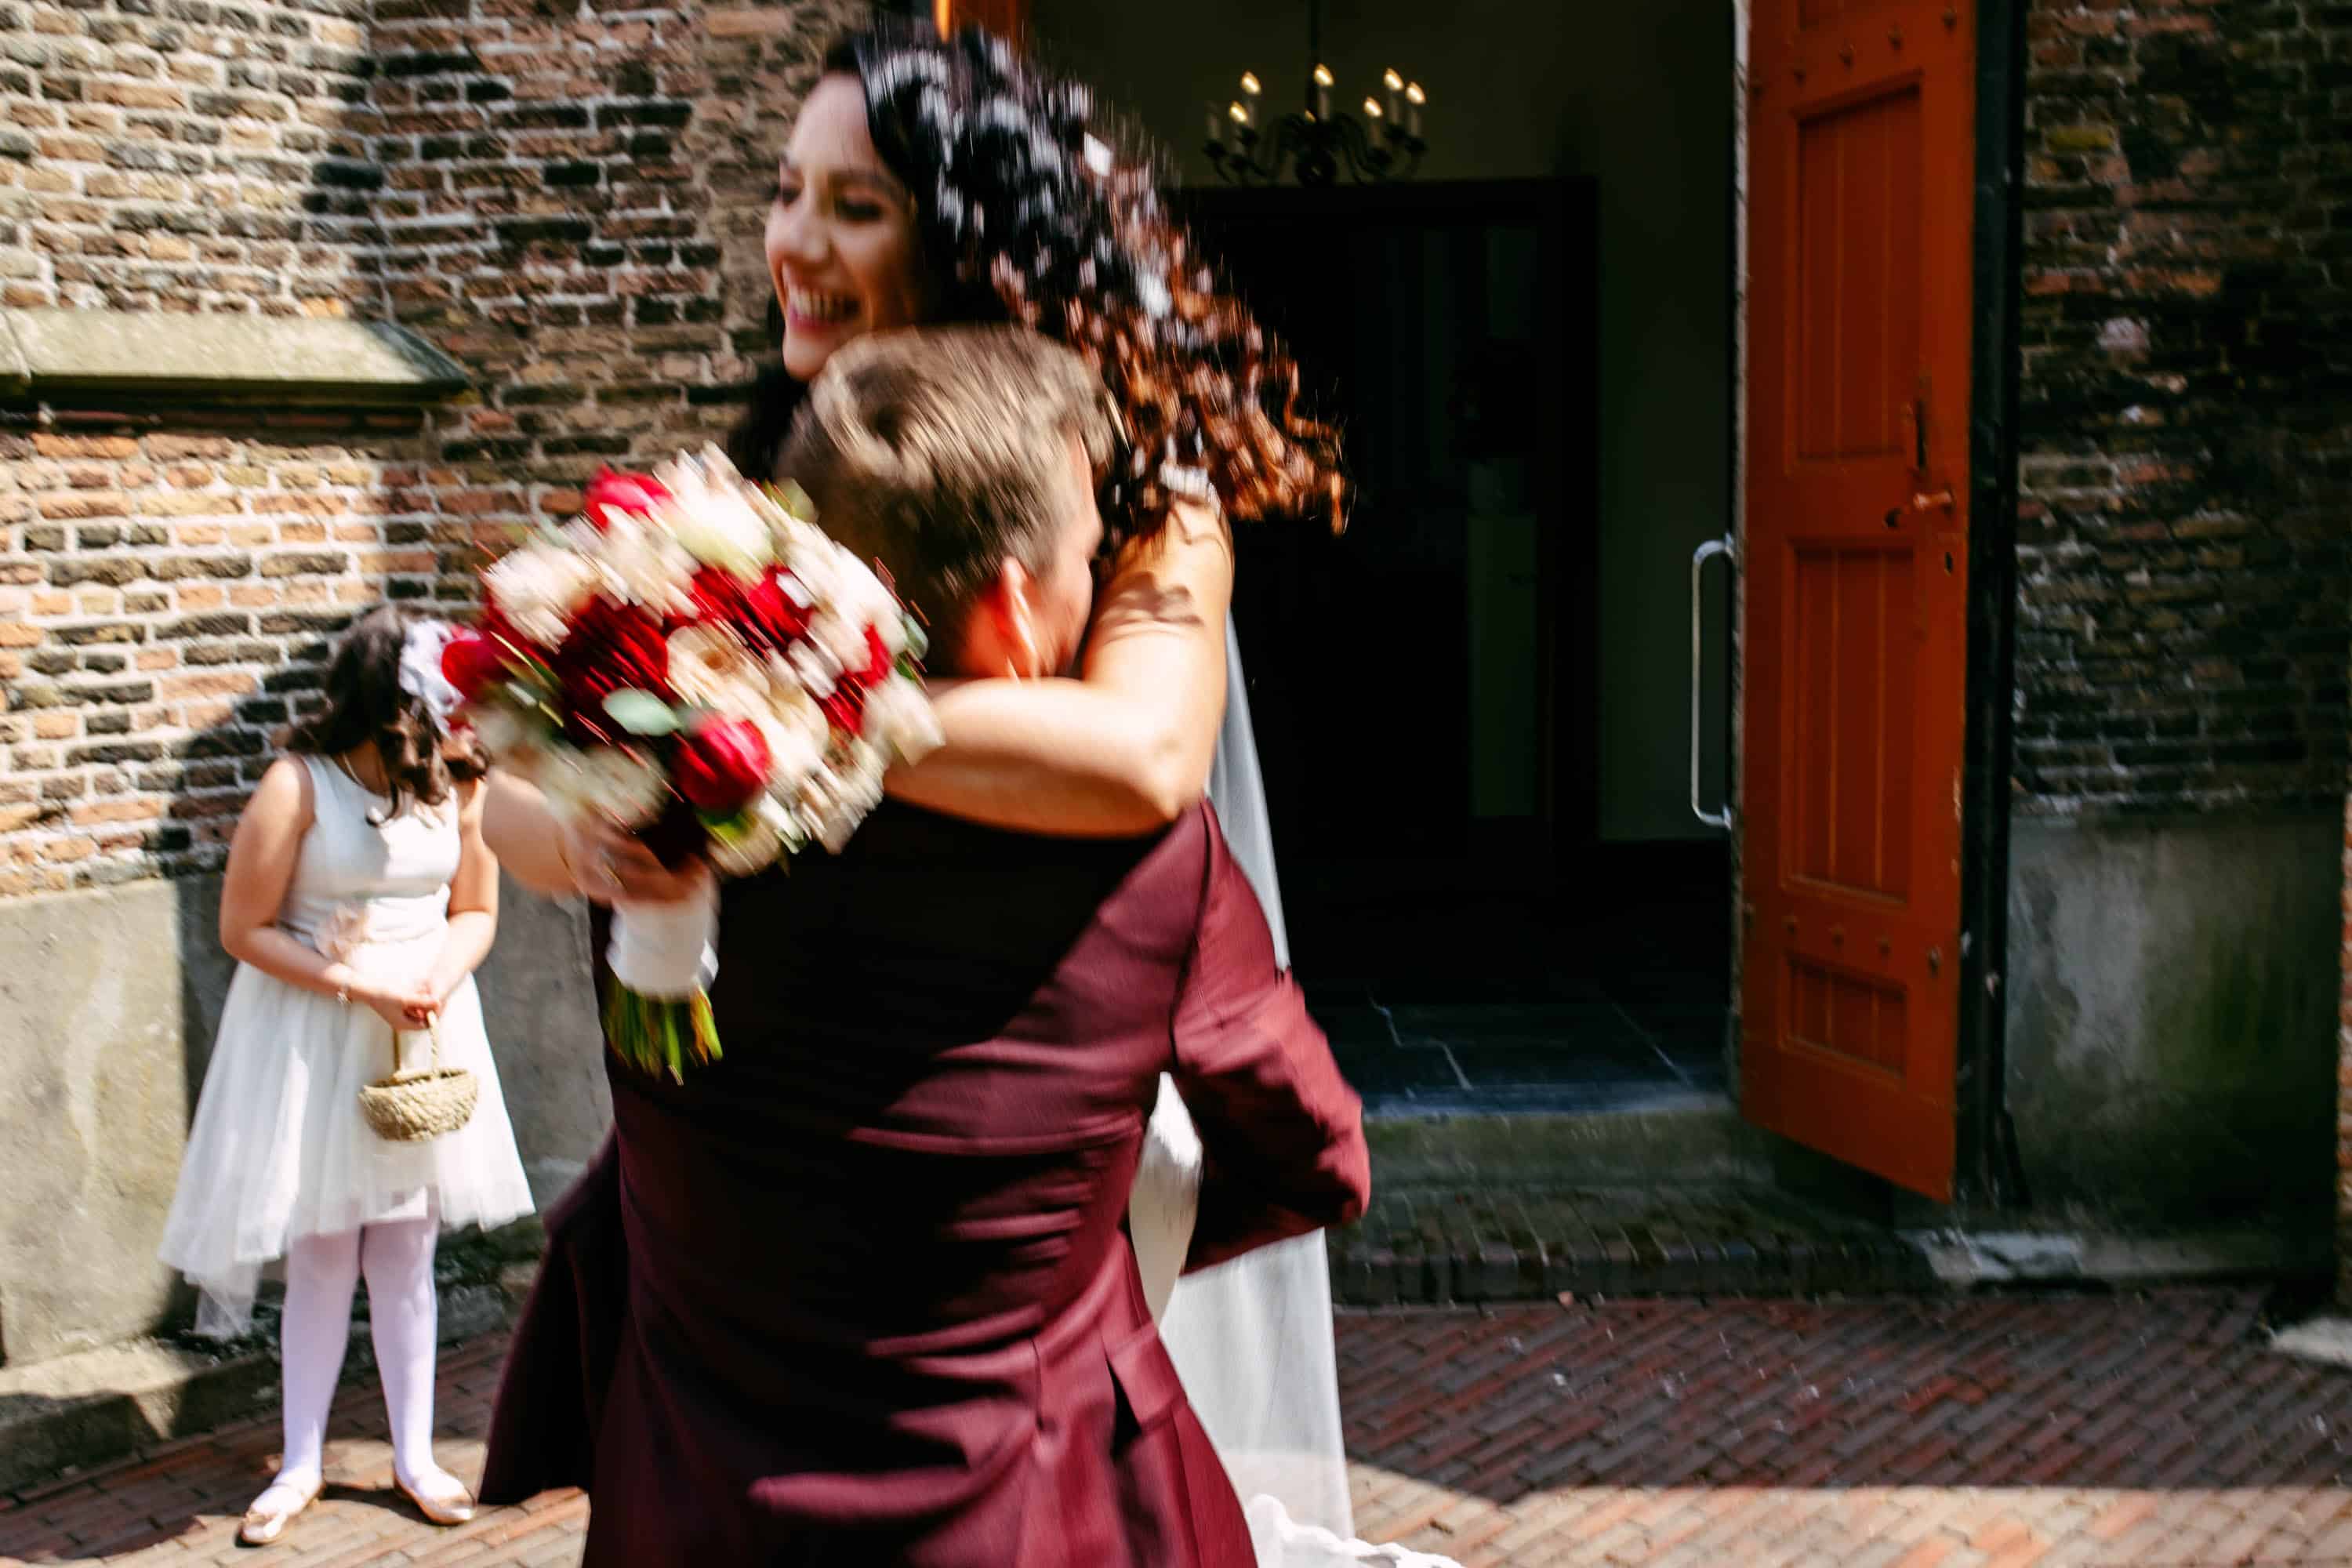 A bride and groom hug in front of a brick building.